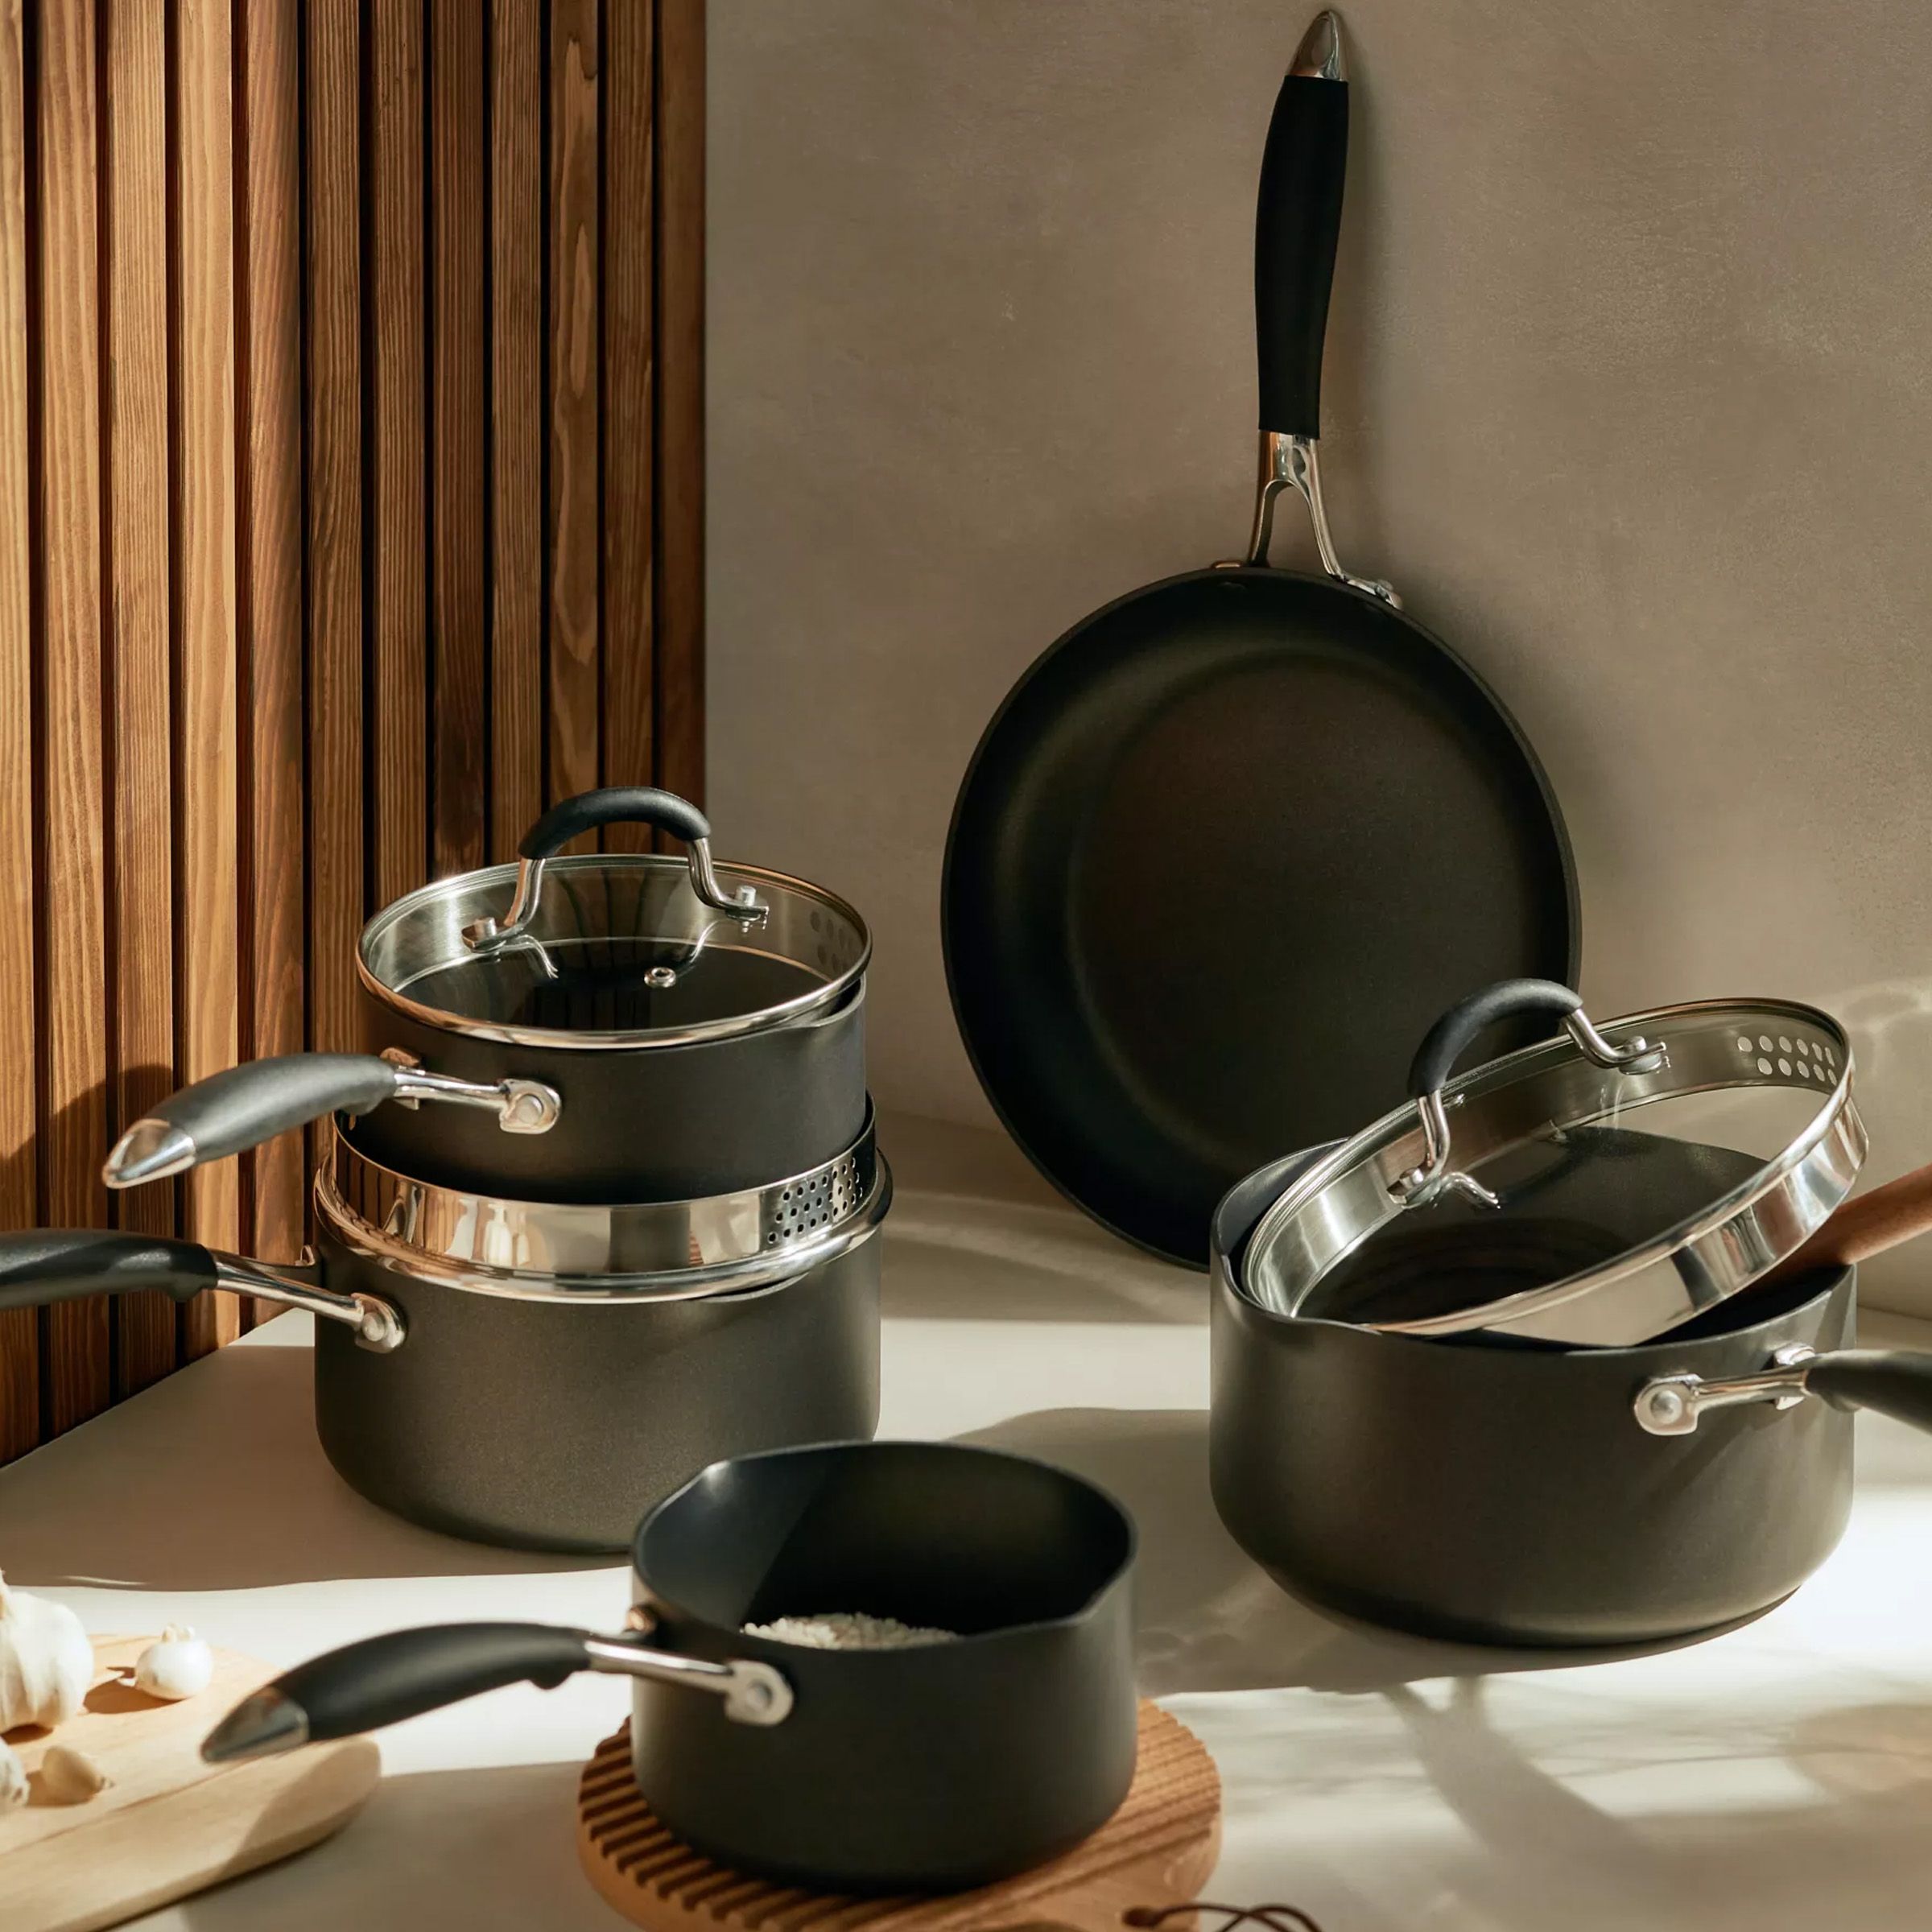 complete the set, matching pan sets for all your cooking and baking needs